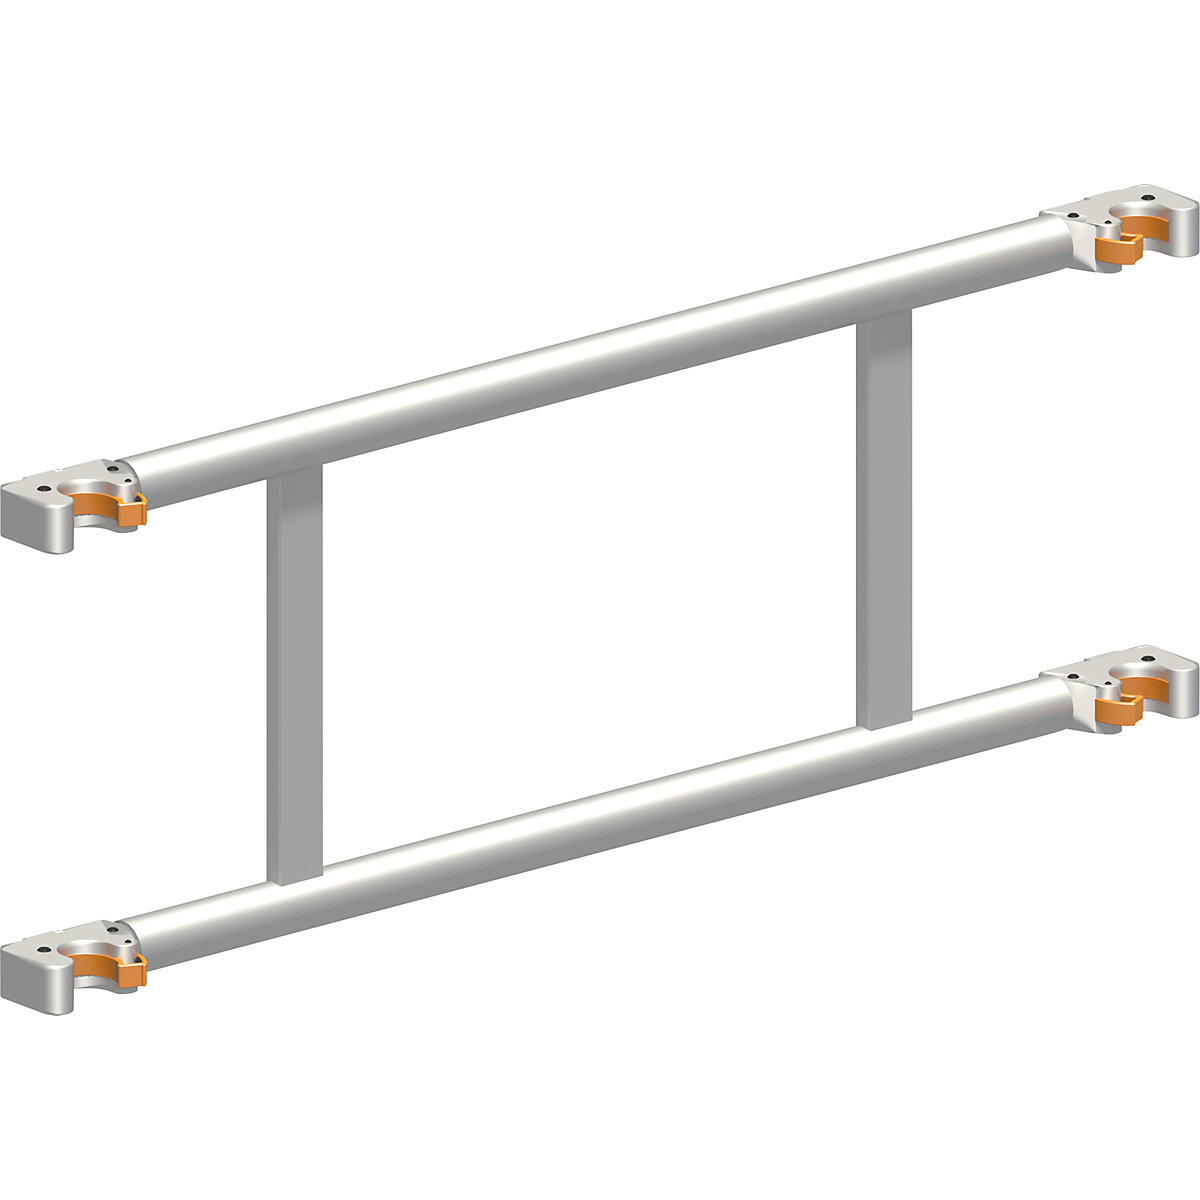 Double railing - Layher